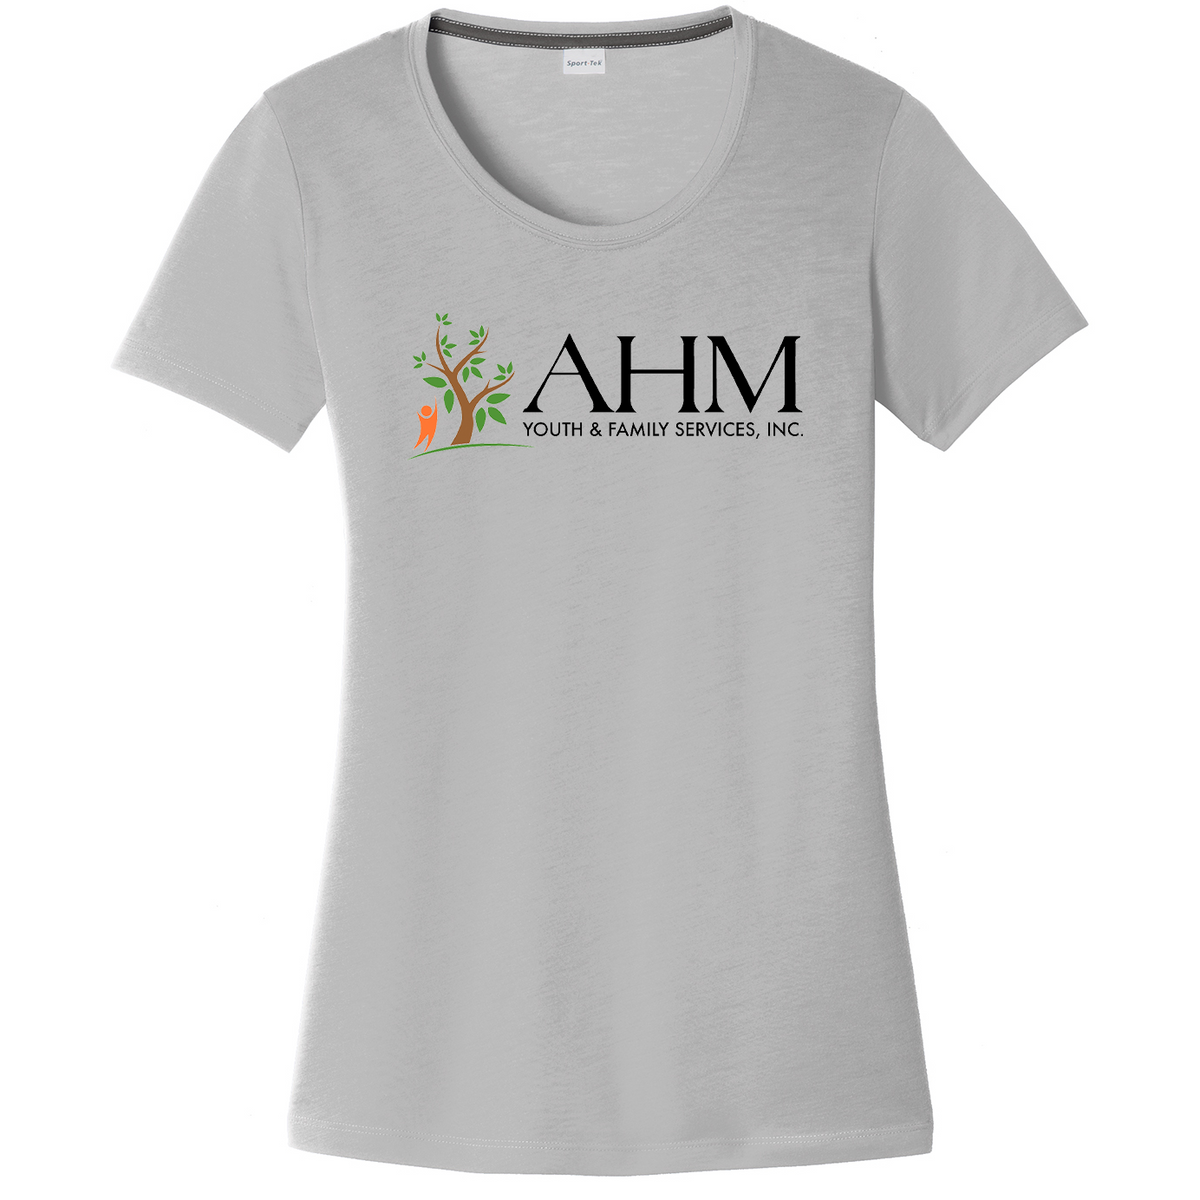 AHM Youth & Family Services Women's CottonTouch Performance T-Shirt